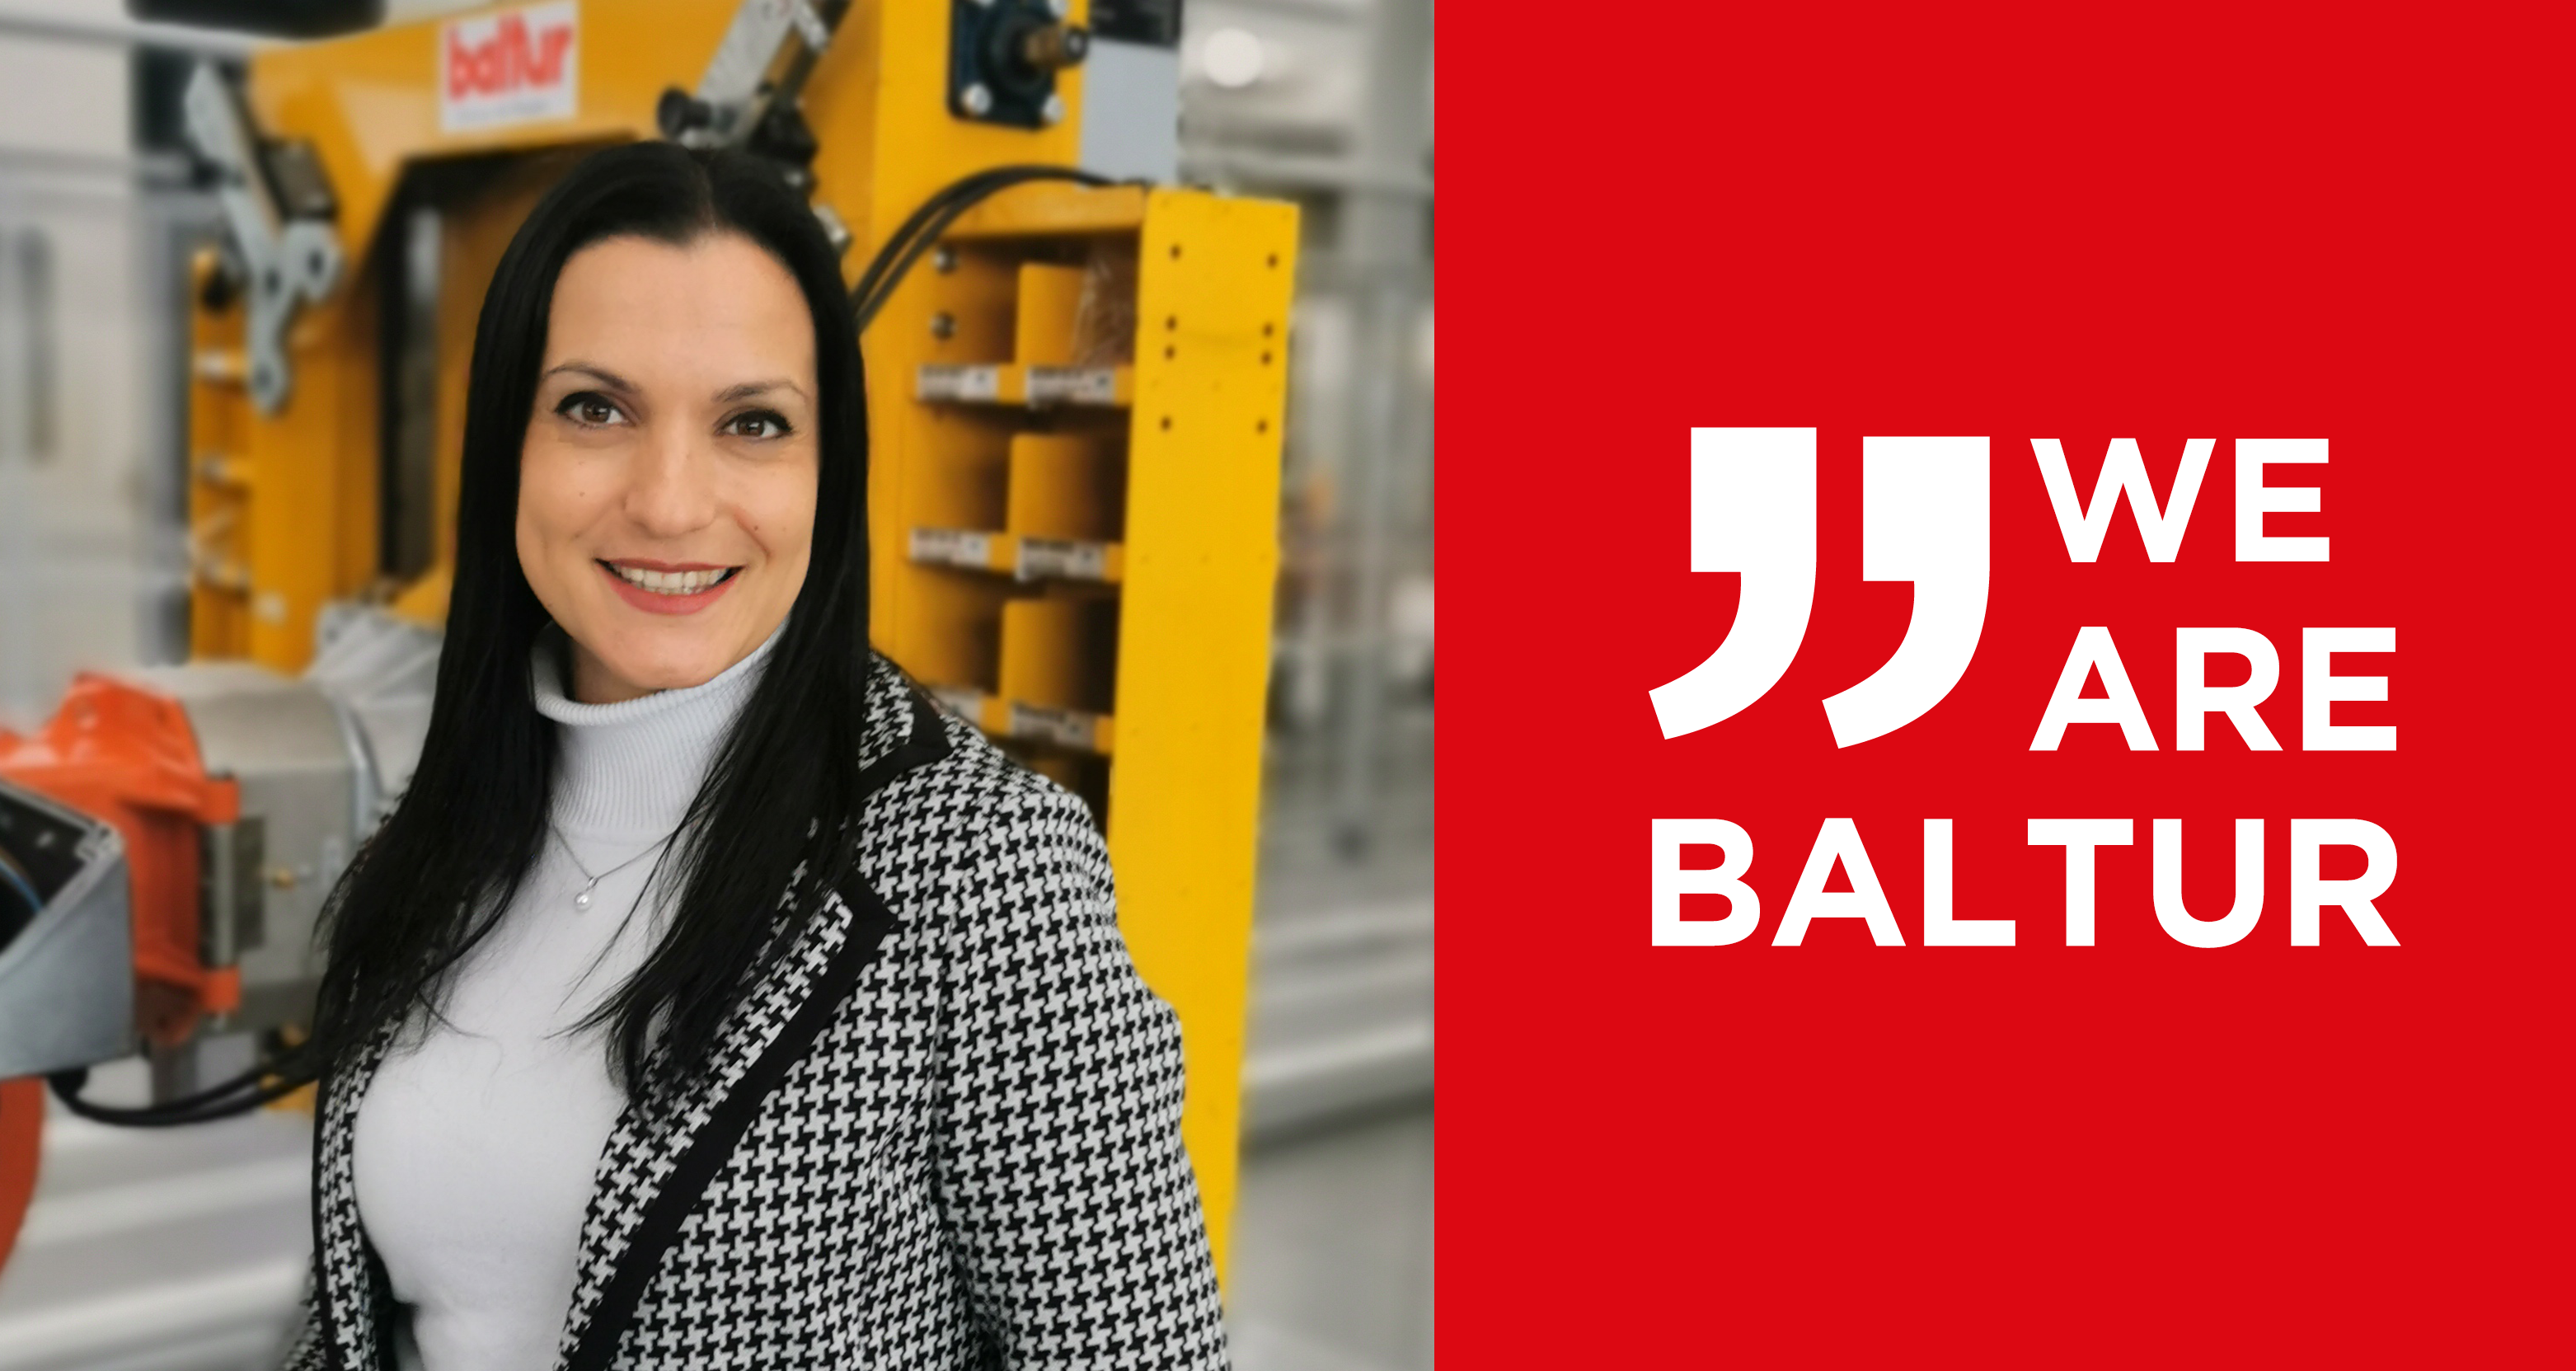 Growth and career at Baltur: interview with HR Manager Margherita Zaverio 1